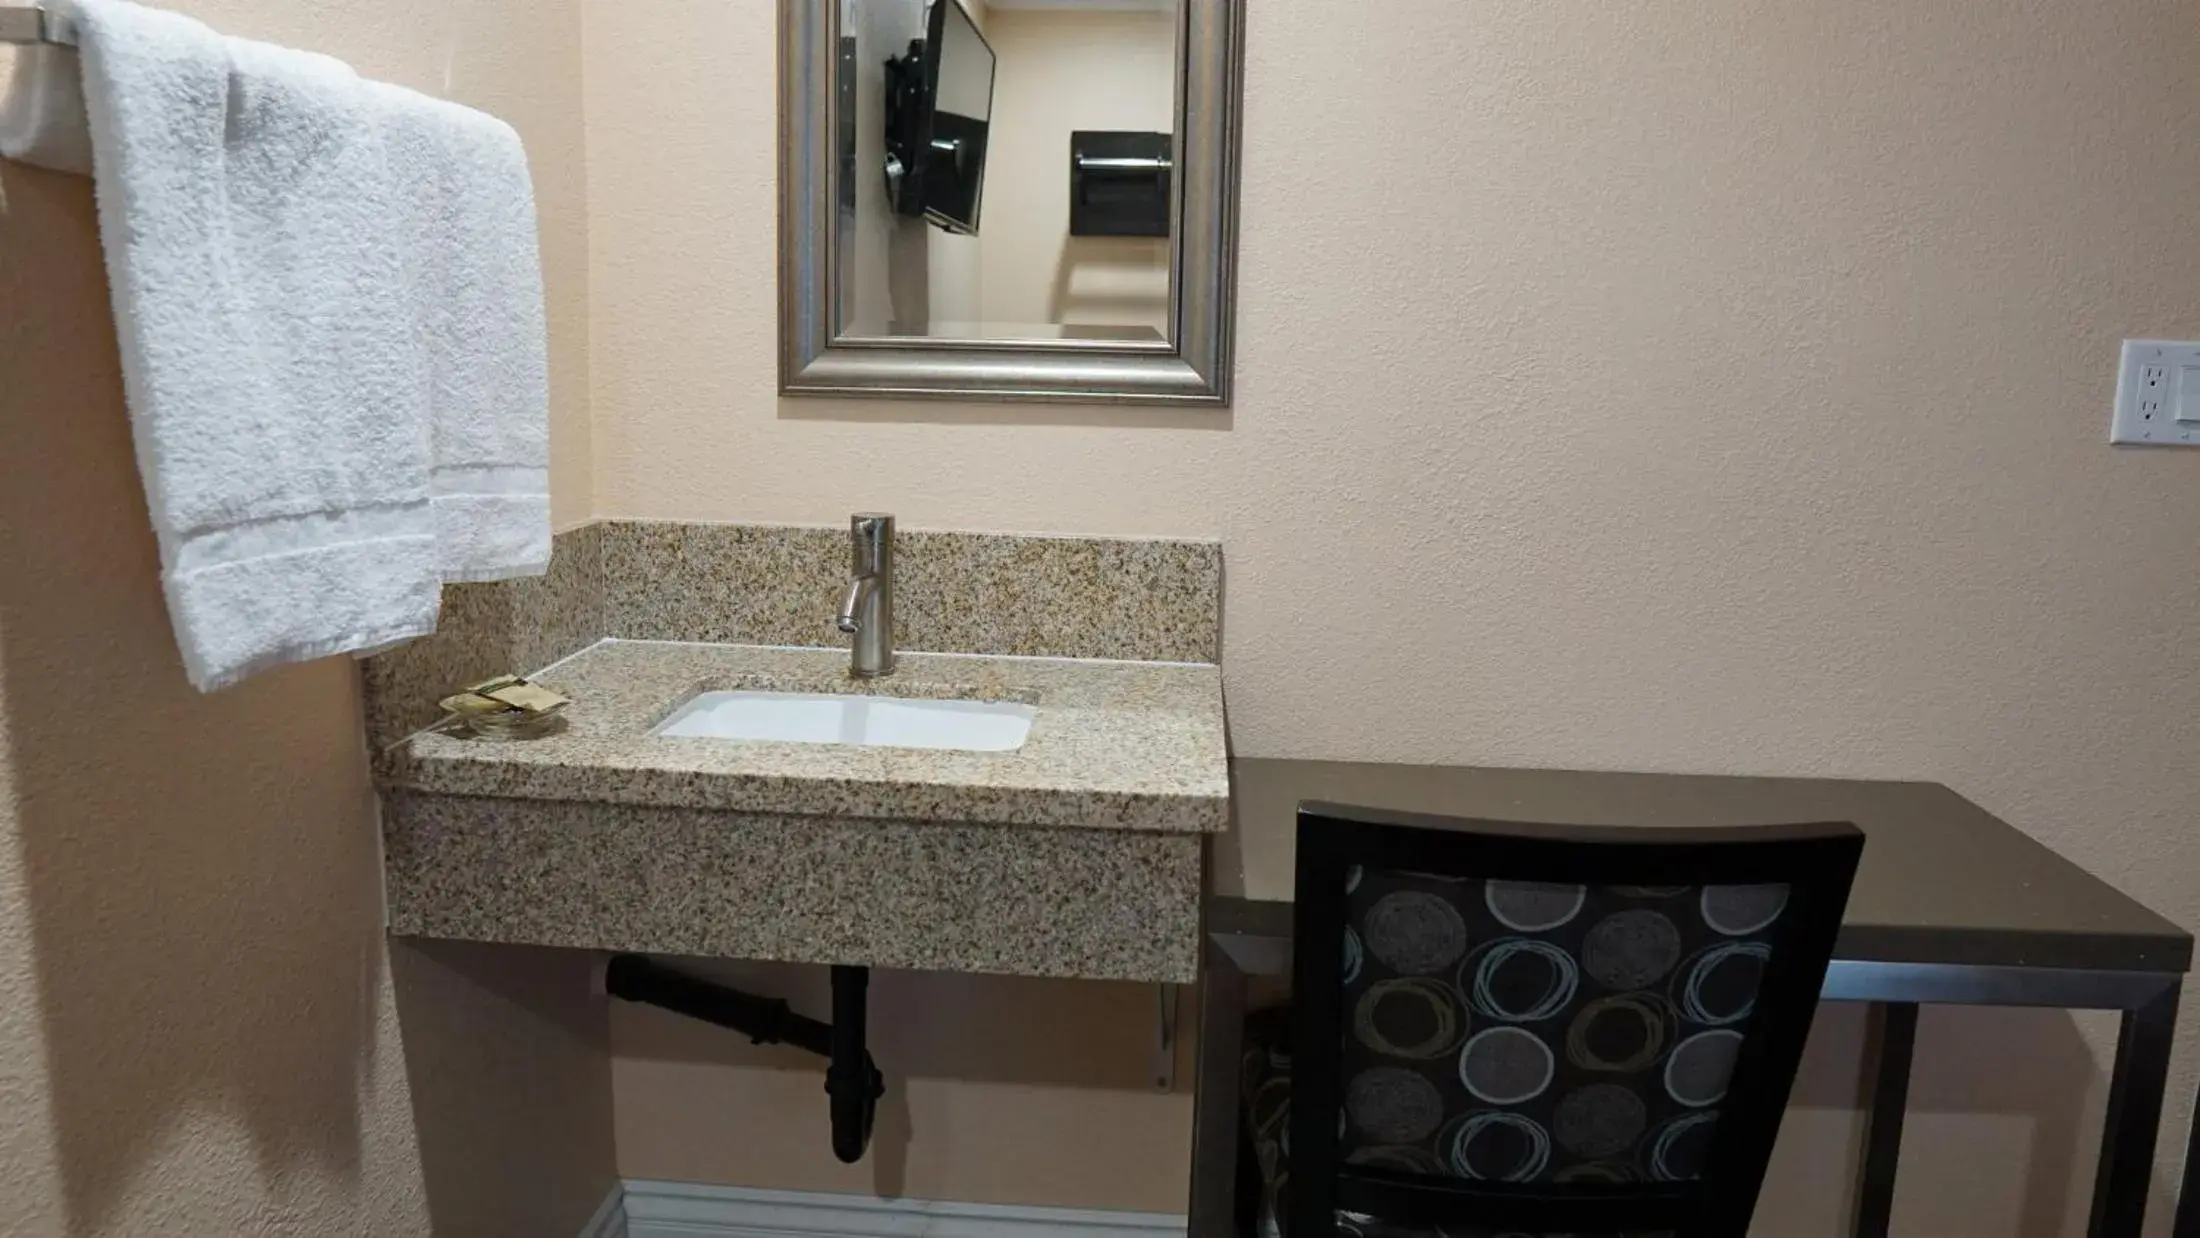 Bathroom in Holly Crest Hotel - Los Angeles, LAX Airport